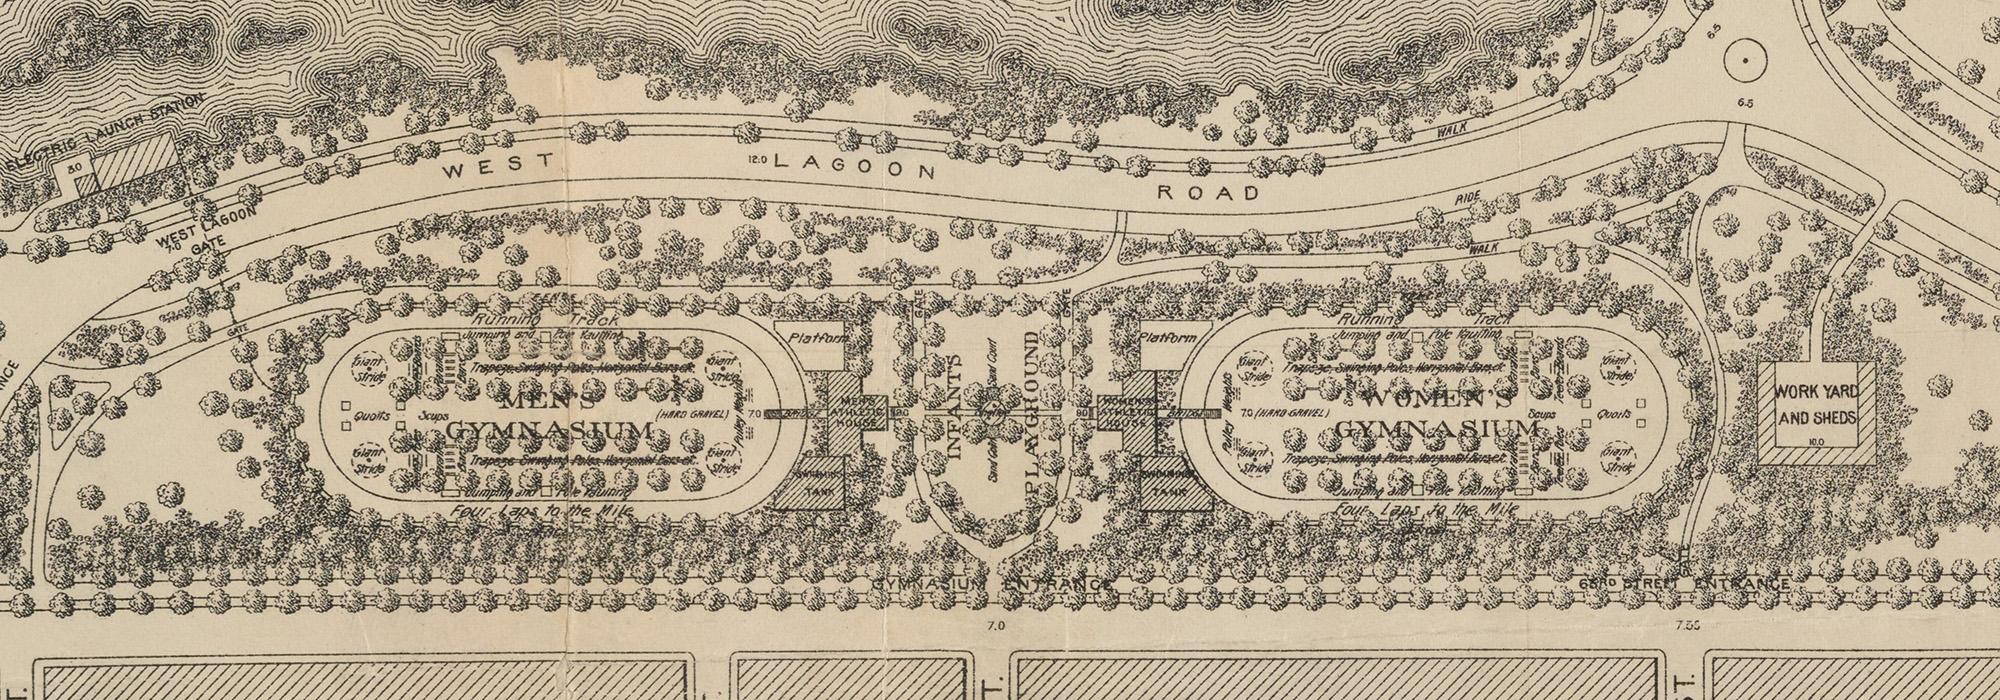 Detail of the Revised General Plan for Jackson Park, 1895, showing Gymnasia